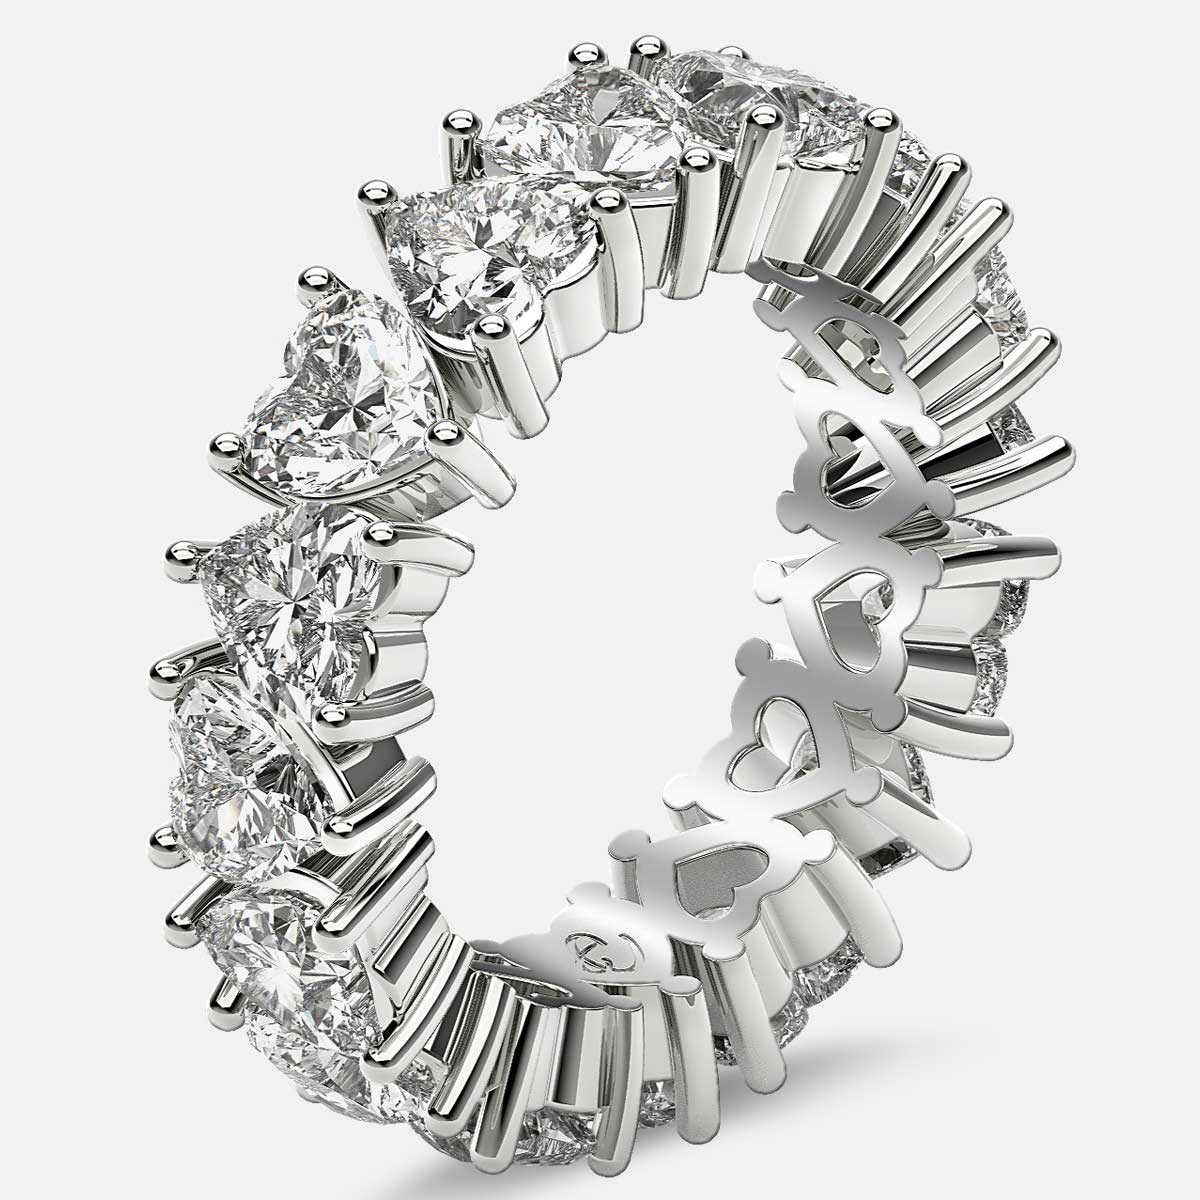 Prong Set Eternity Ring with Heart Shaped Diamonds in 18k White Gold